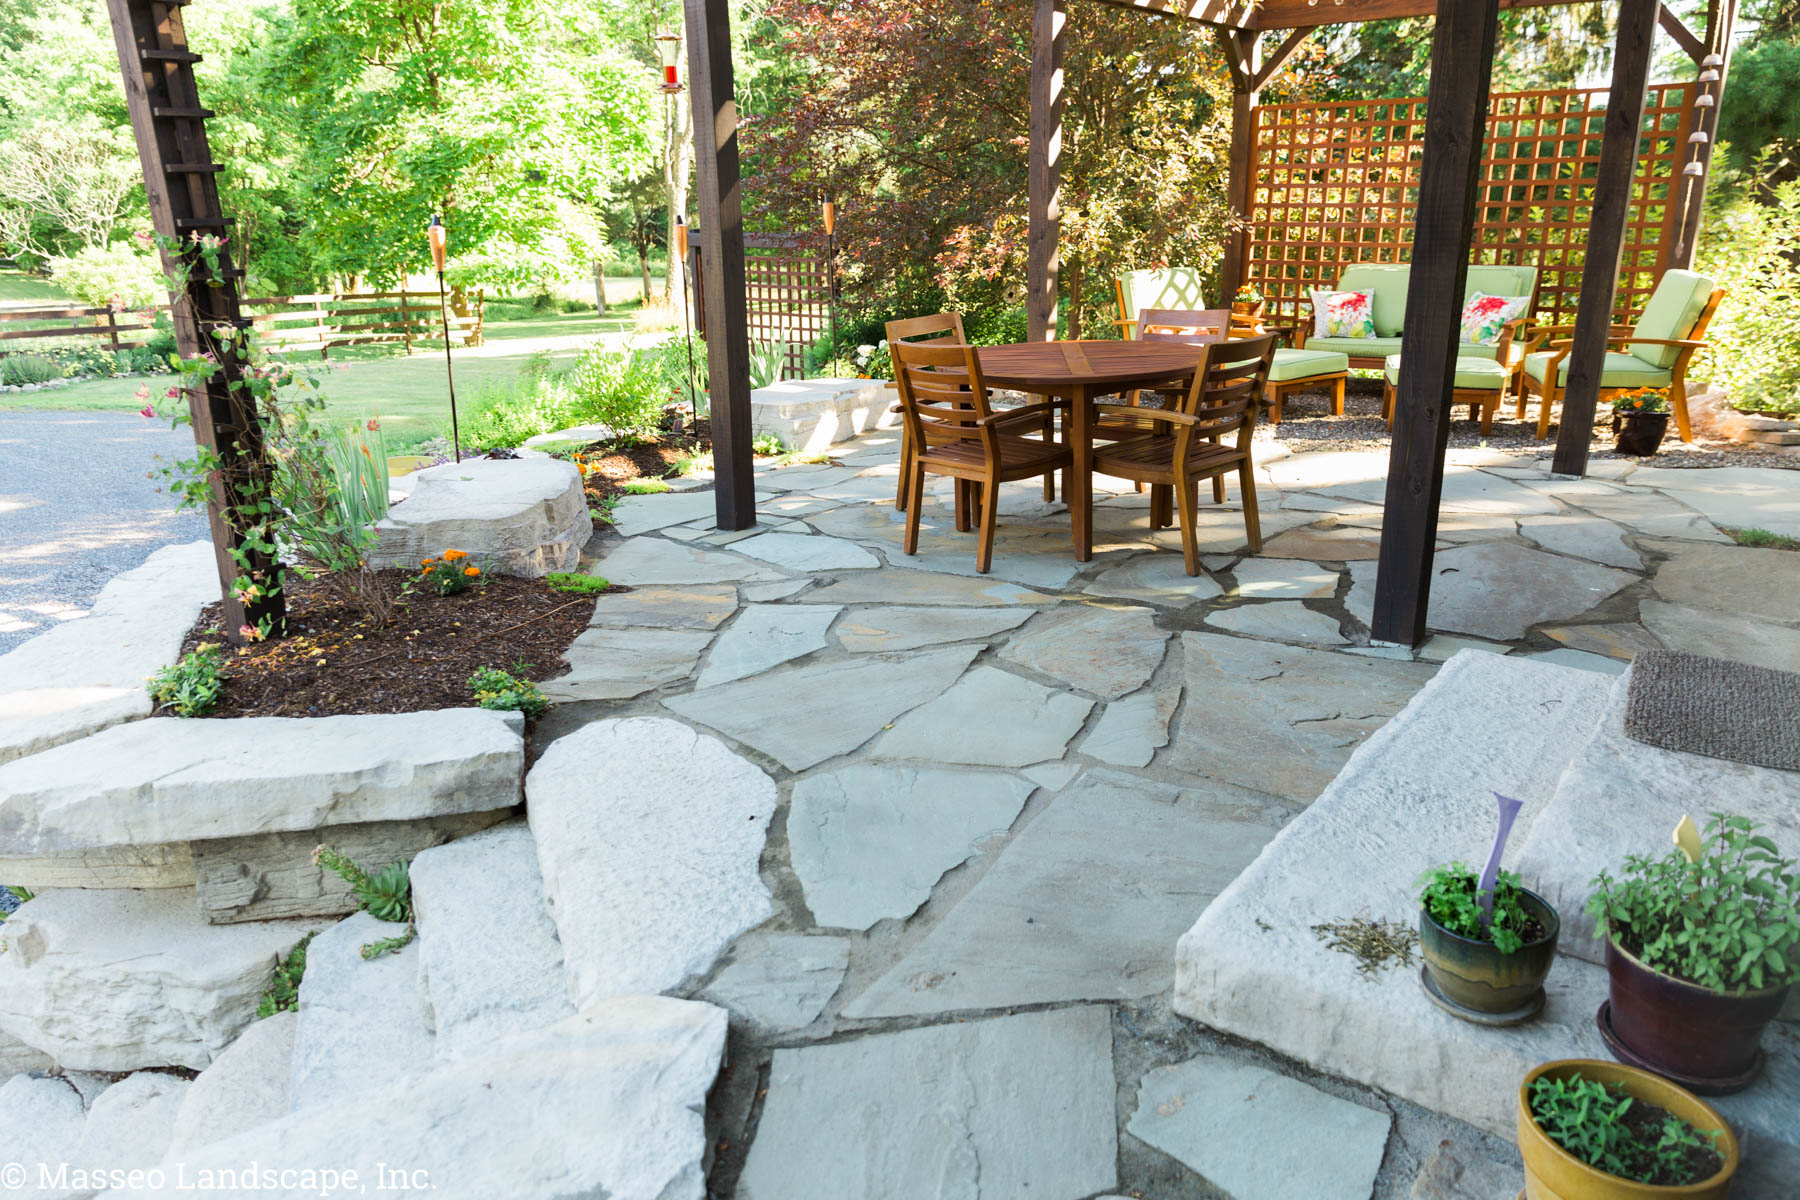 A natural bluestone patio with Rosetta Hardscape steps and built in seating, installed by Masseo Landscape in High Falls, NY.